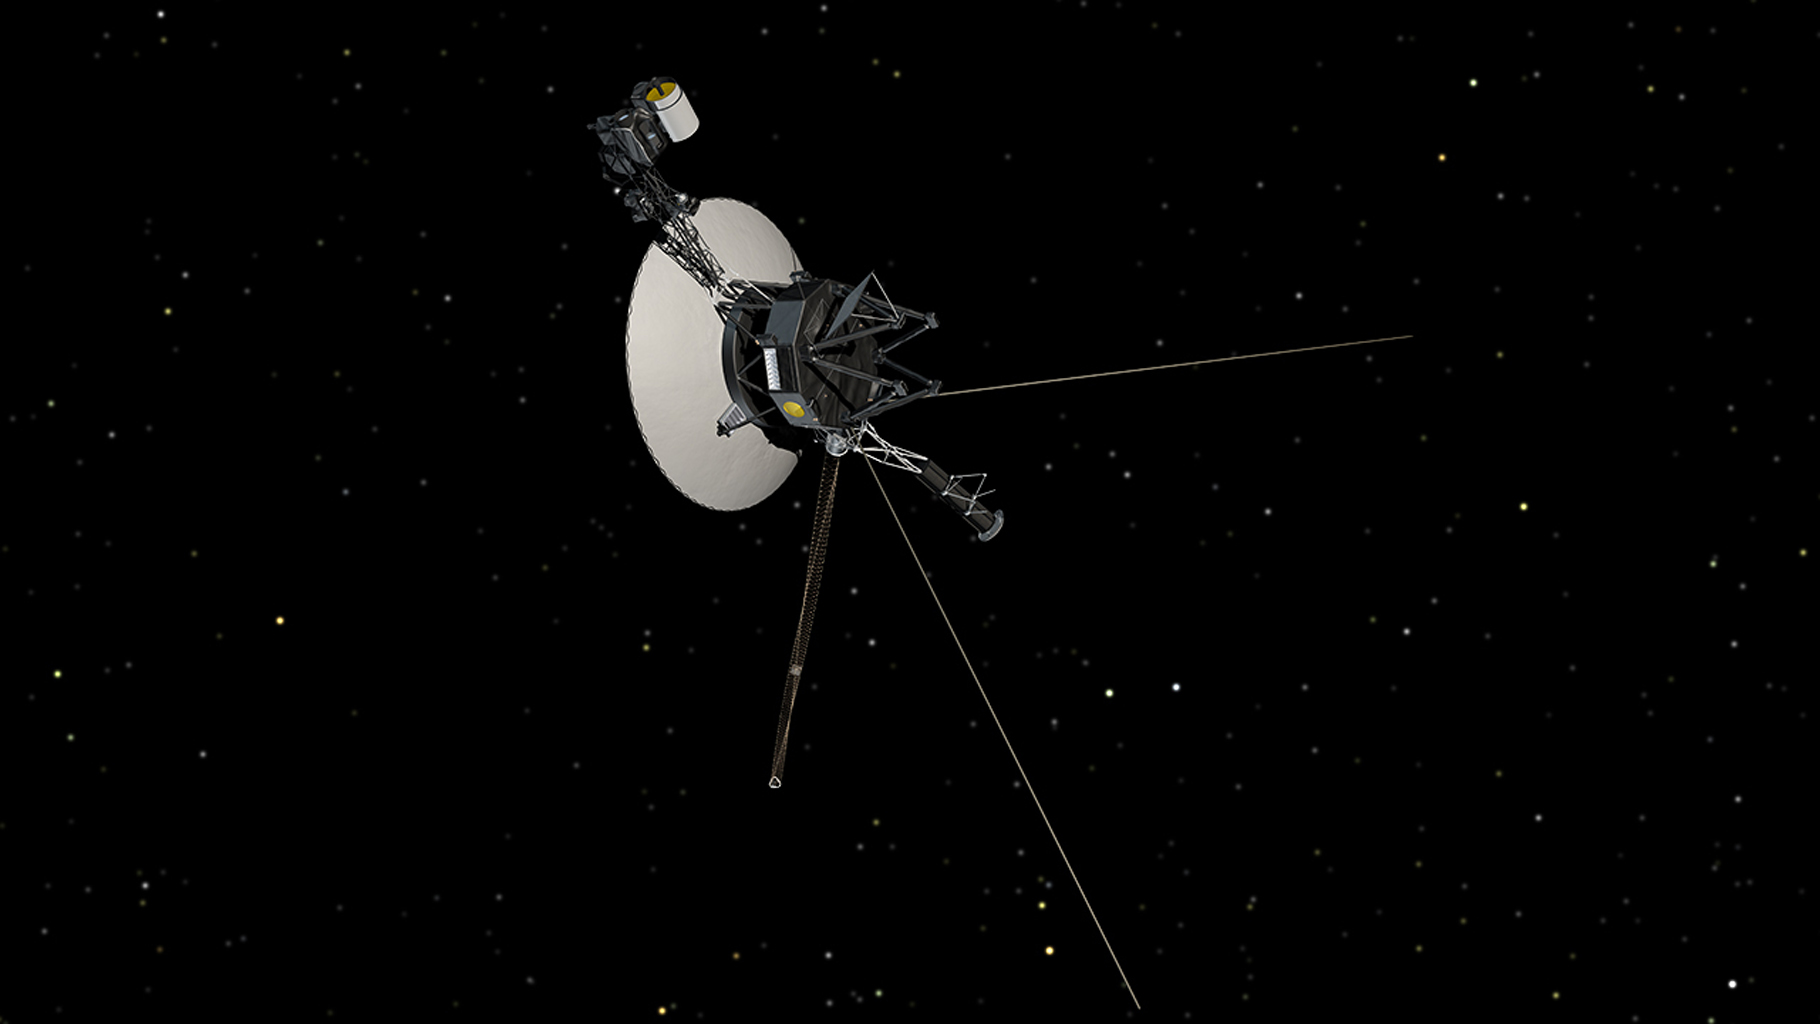 slide 1 - This artist’s concept shows NASA’s Voyager spacecraft against a backdrop of stars.